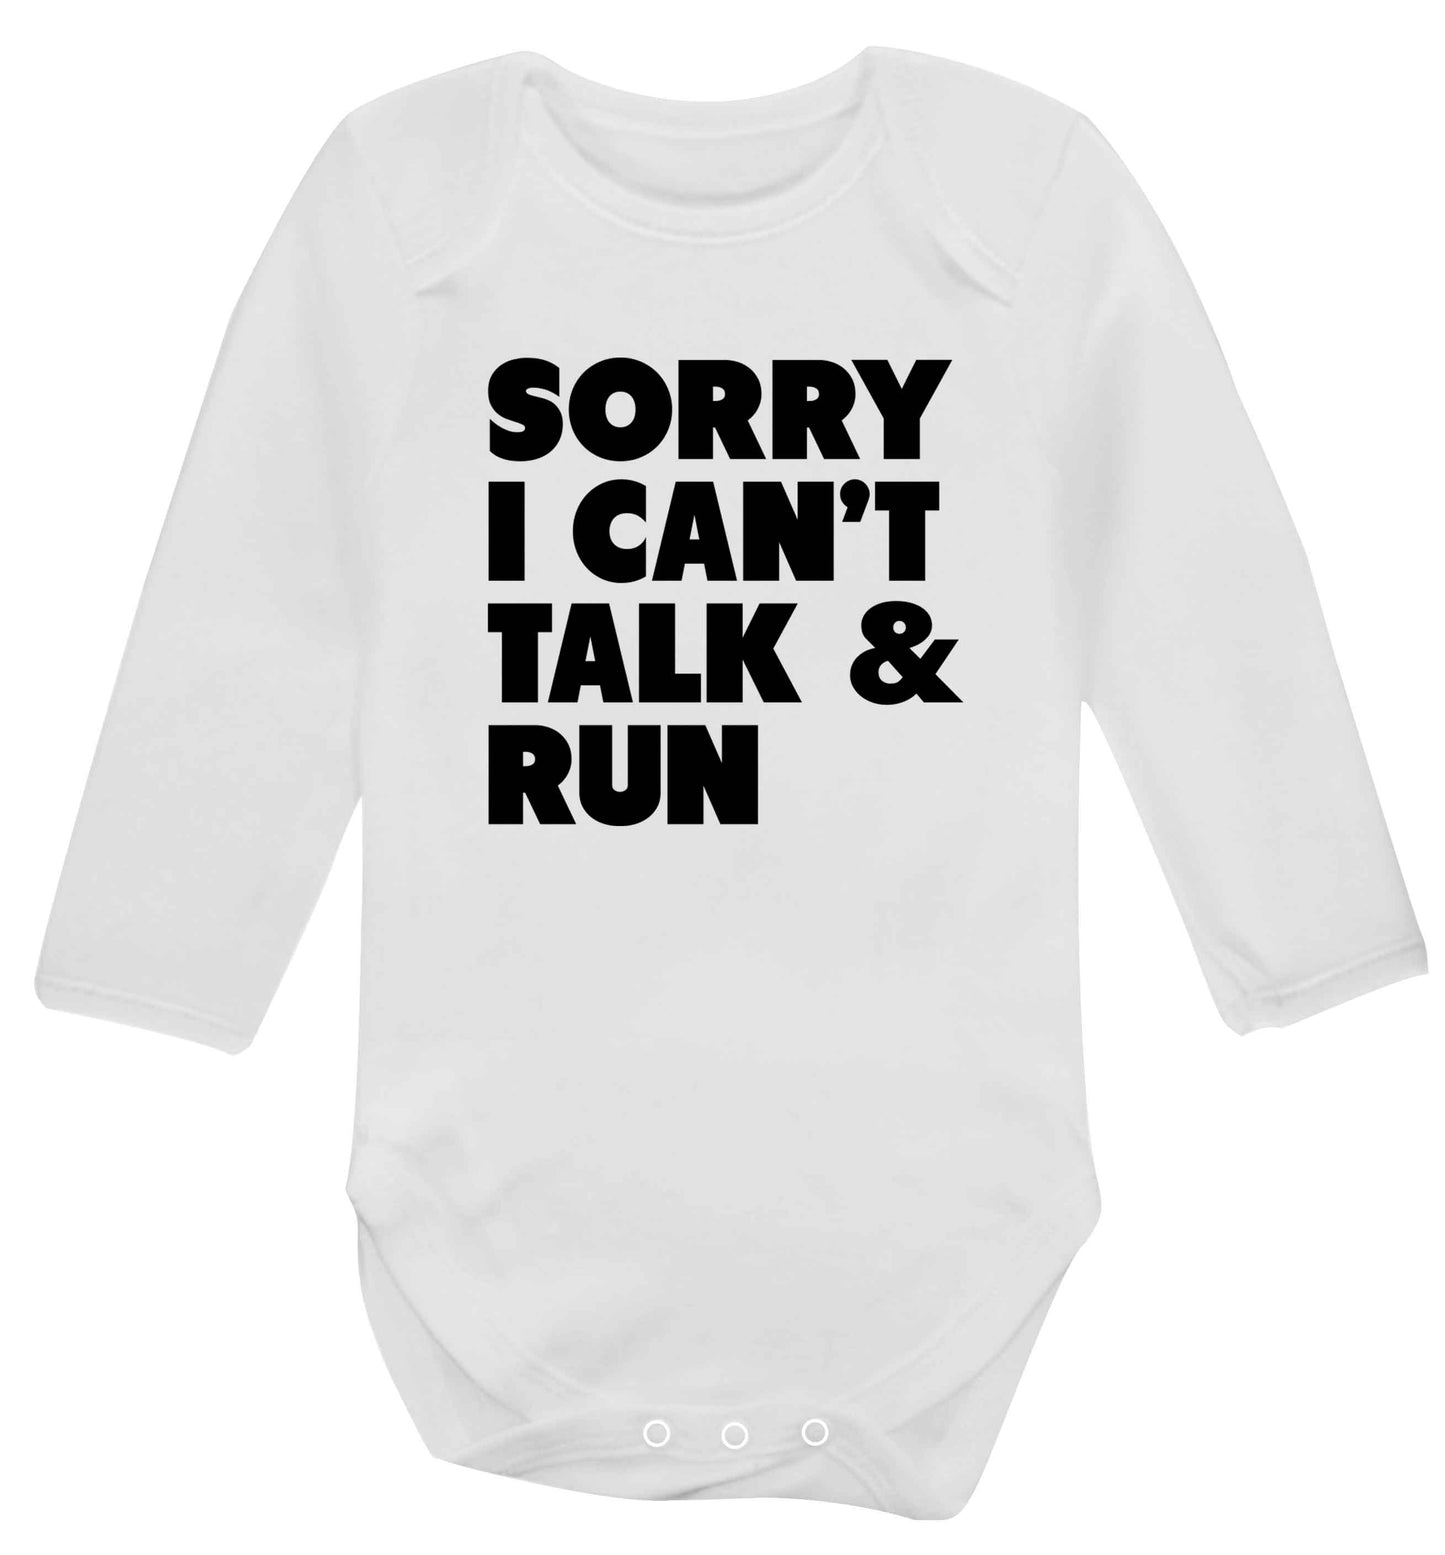 Sorry I can't talk and run baby vest long sleeved white 6-12 months